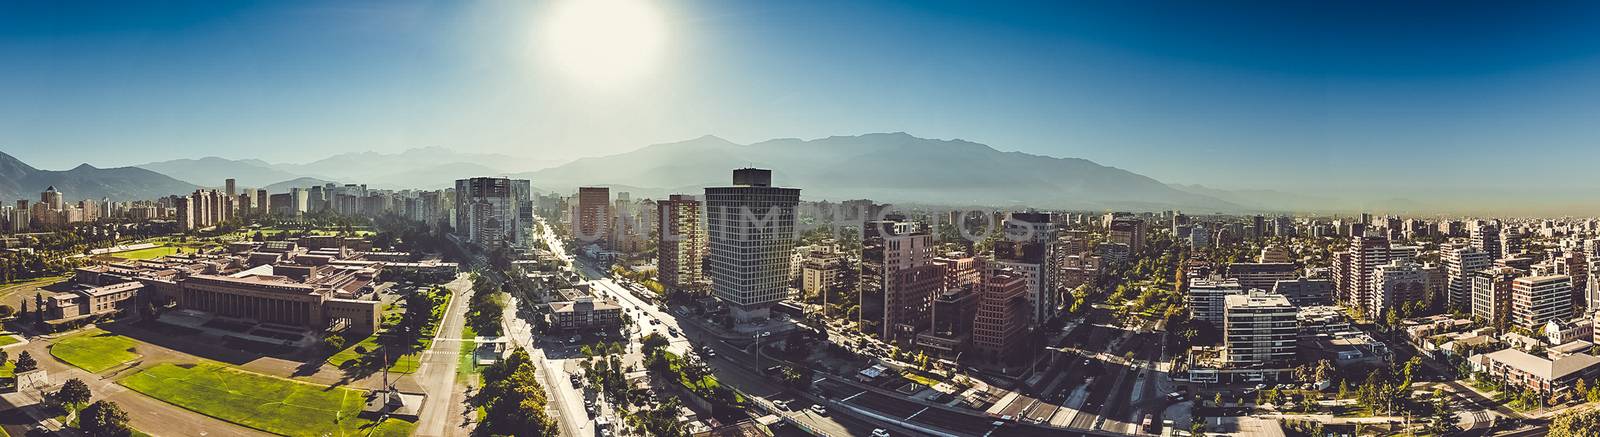 Panoramic view of Santiago de Chile with the Andes mountain rang by mikelju